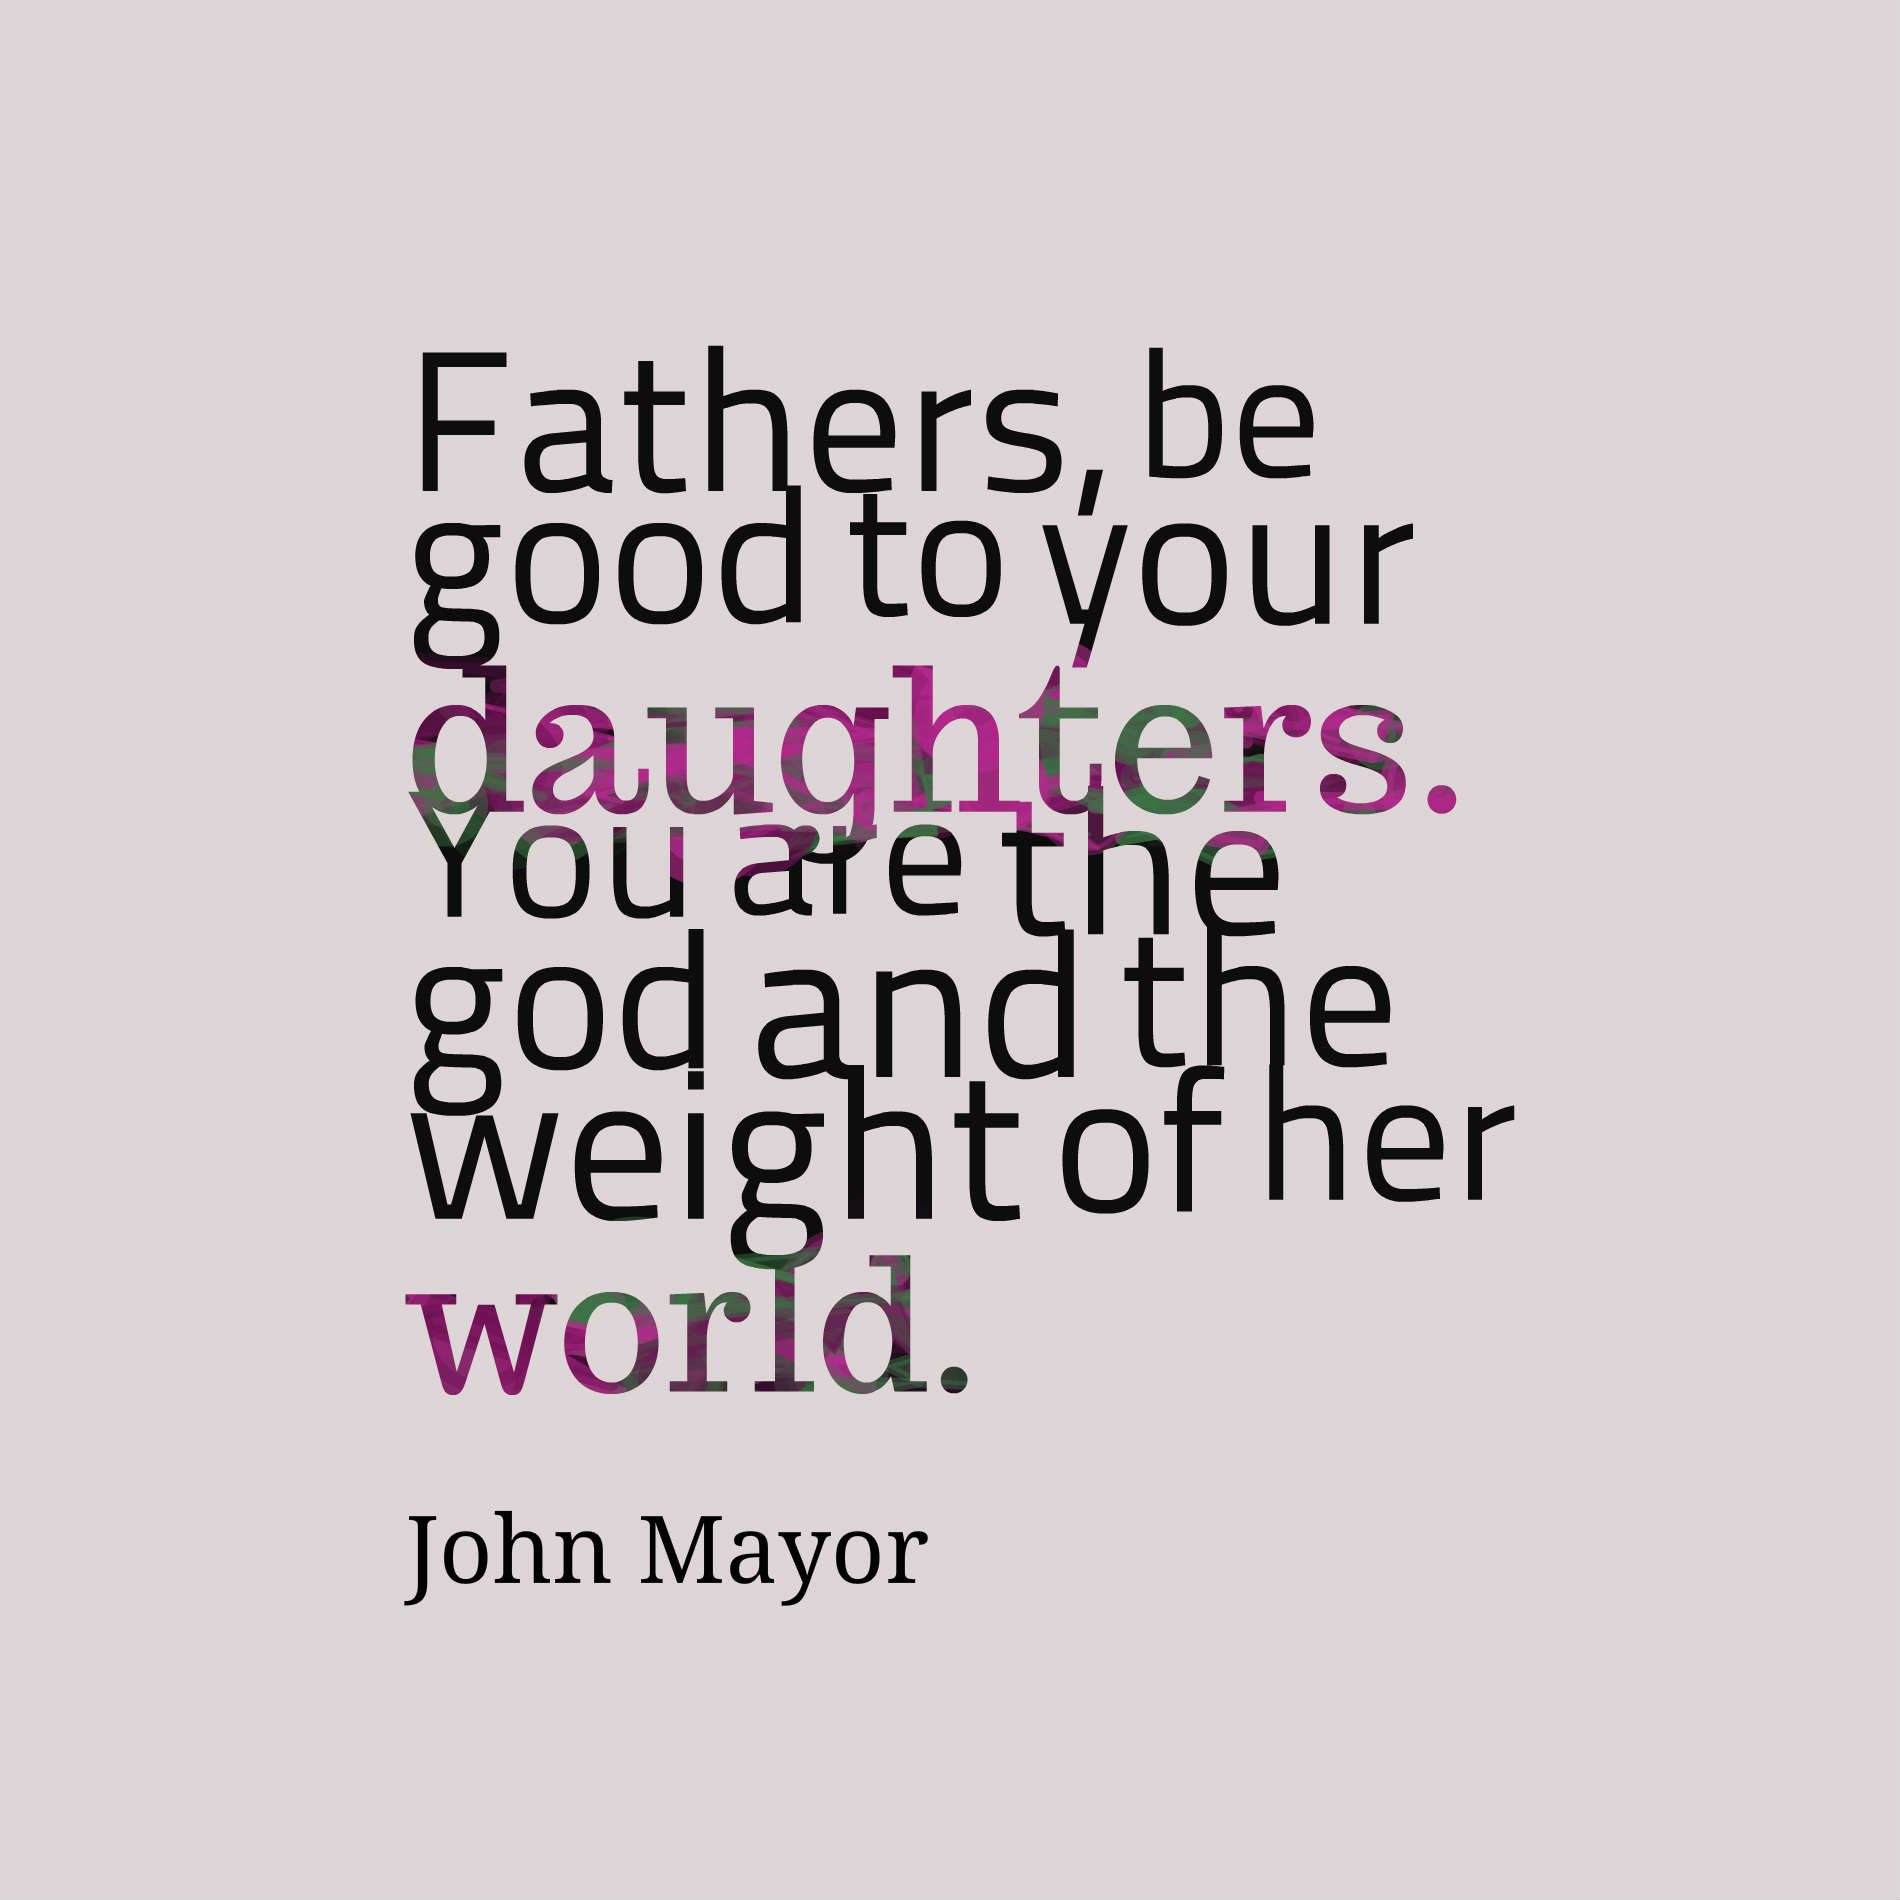 Fathers, be good to your daughters. You are the god and the weight of her world.